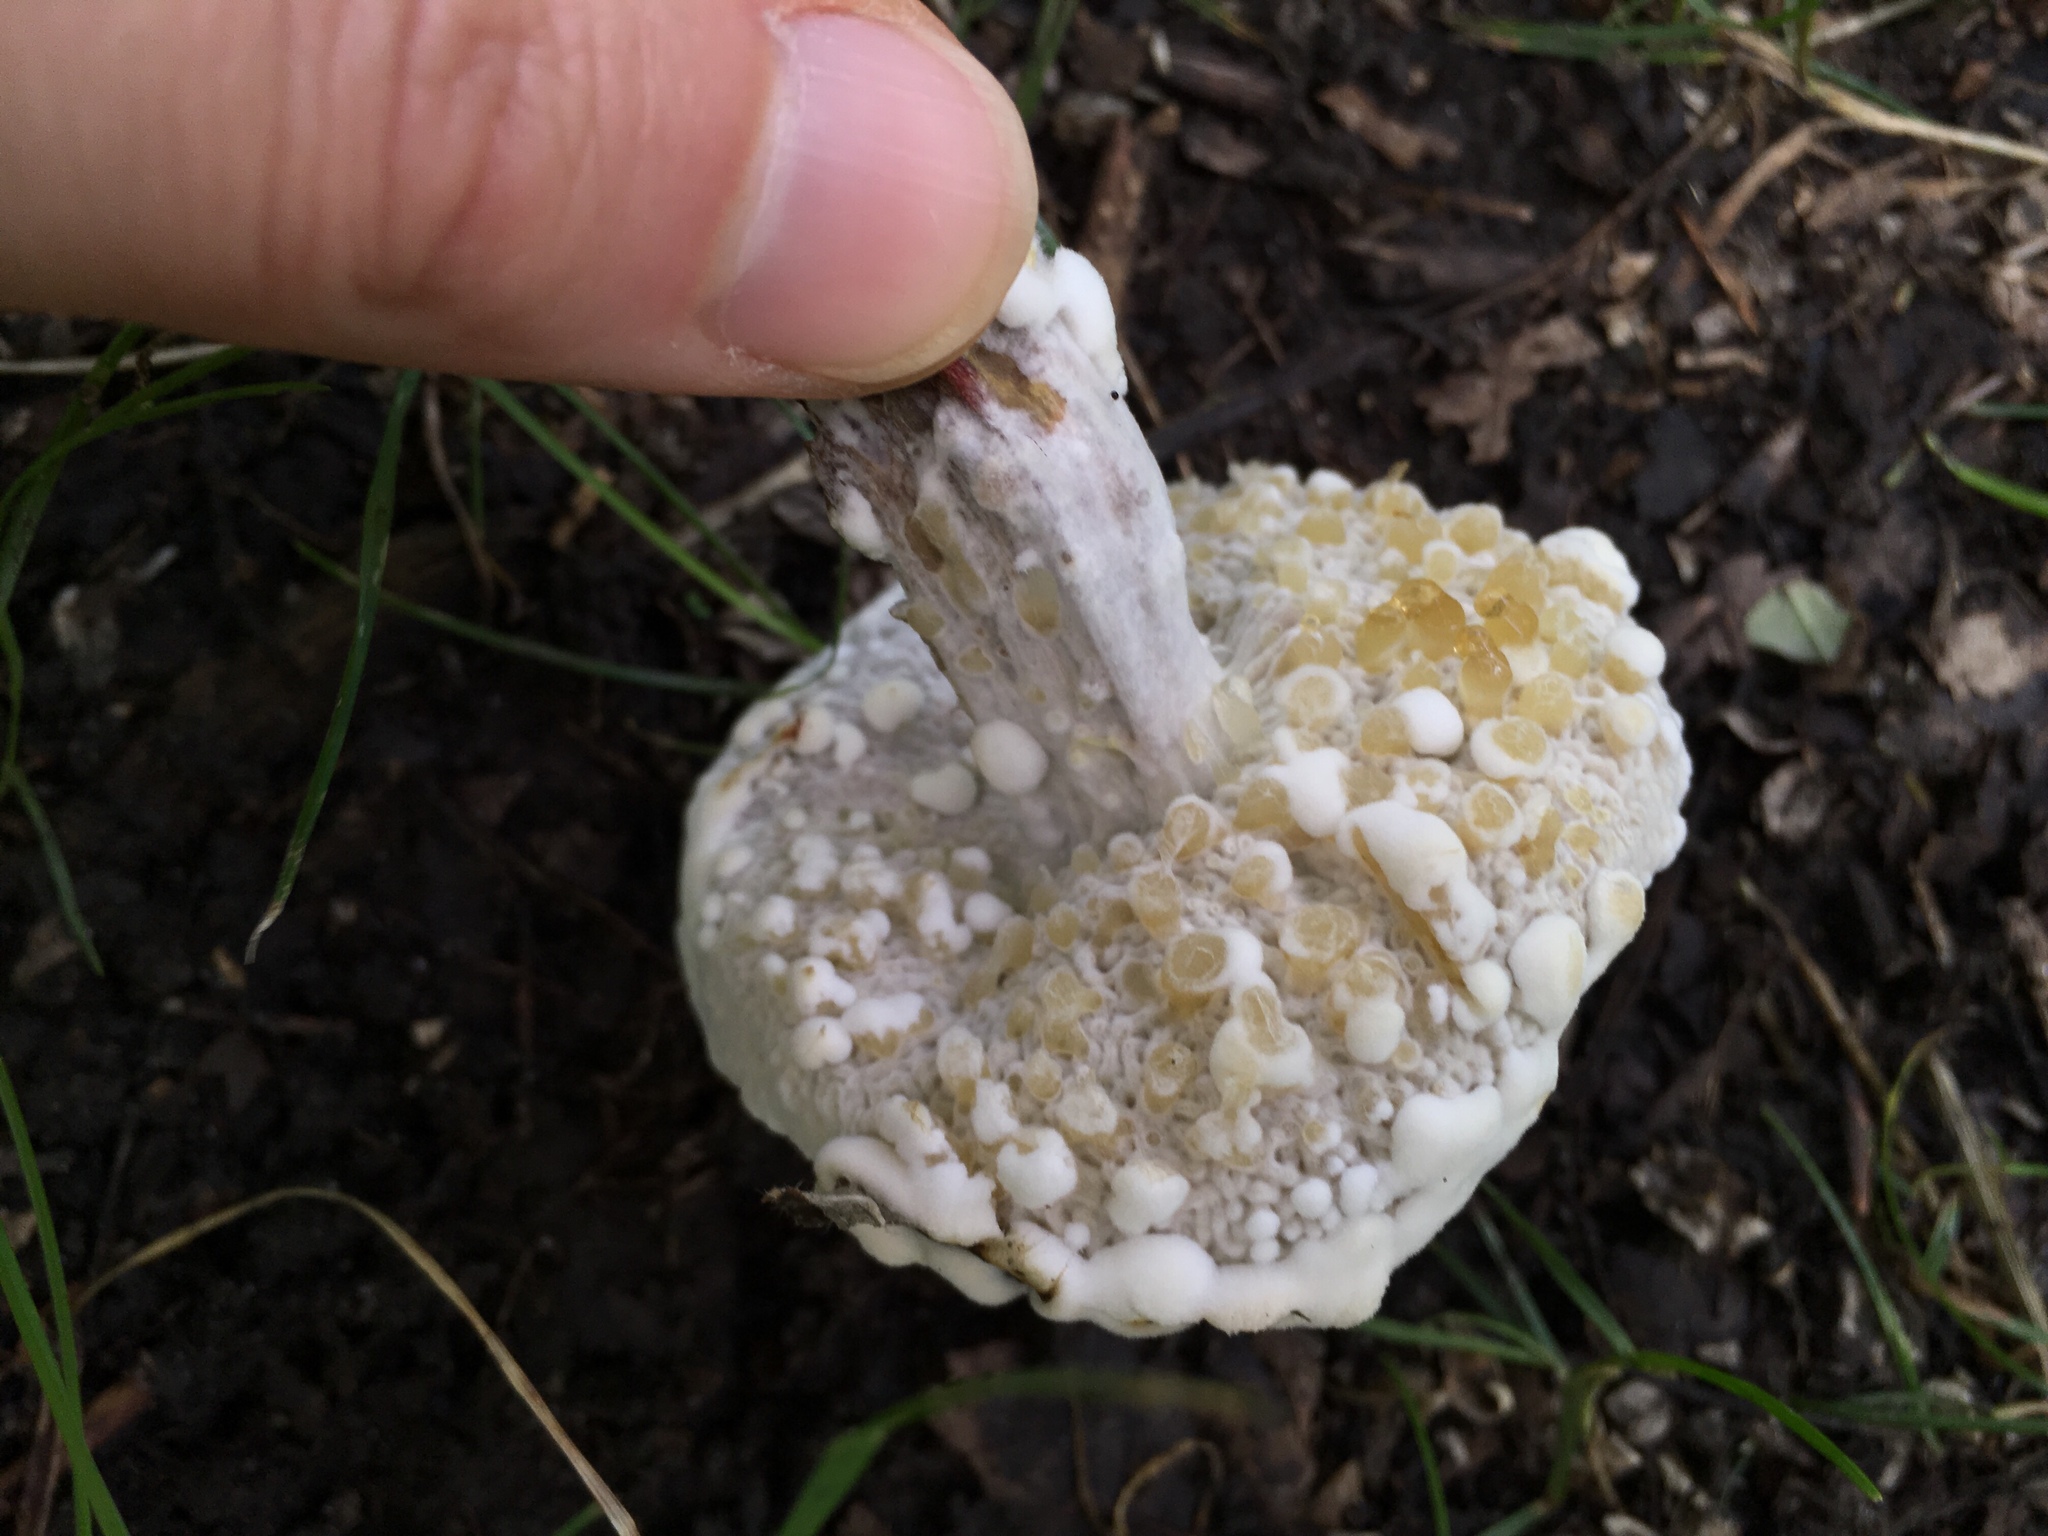 Parasitic Molds - Observation of the Week, 8/5/18 · iNaturalist